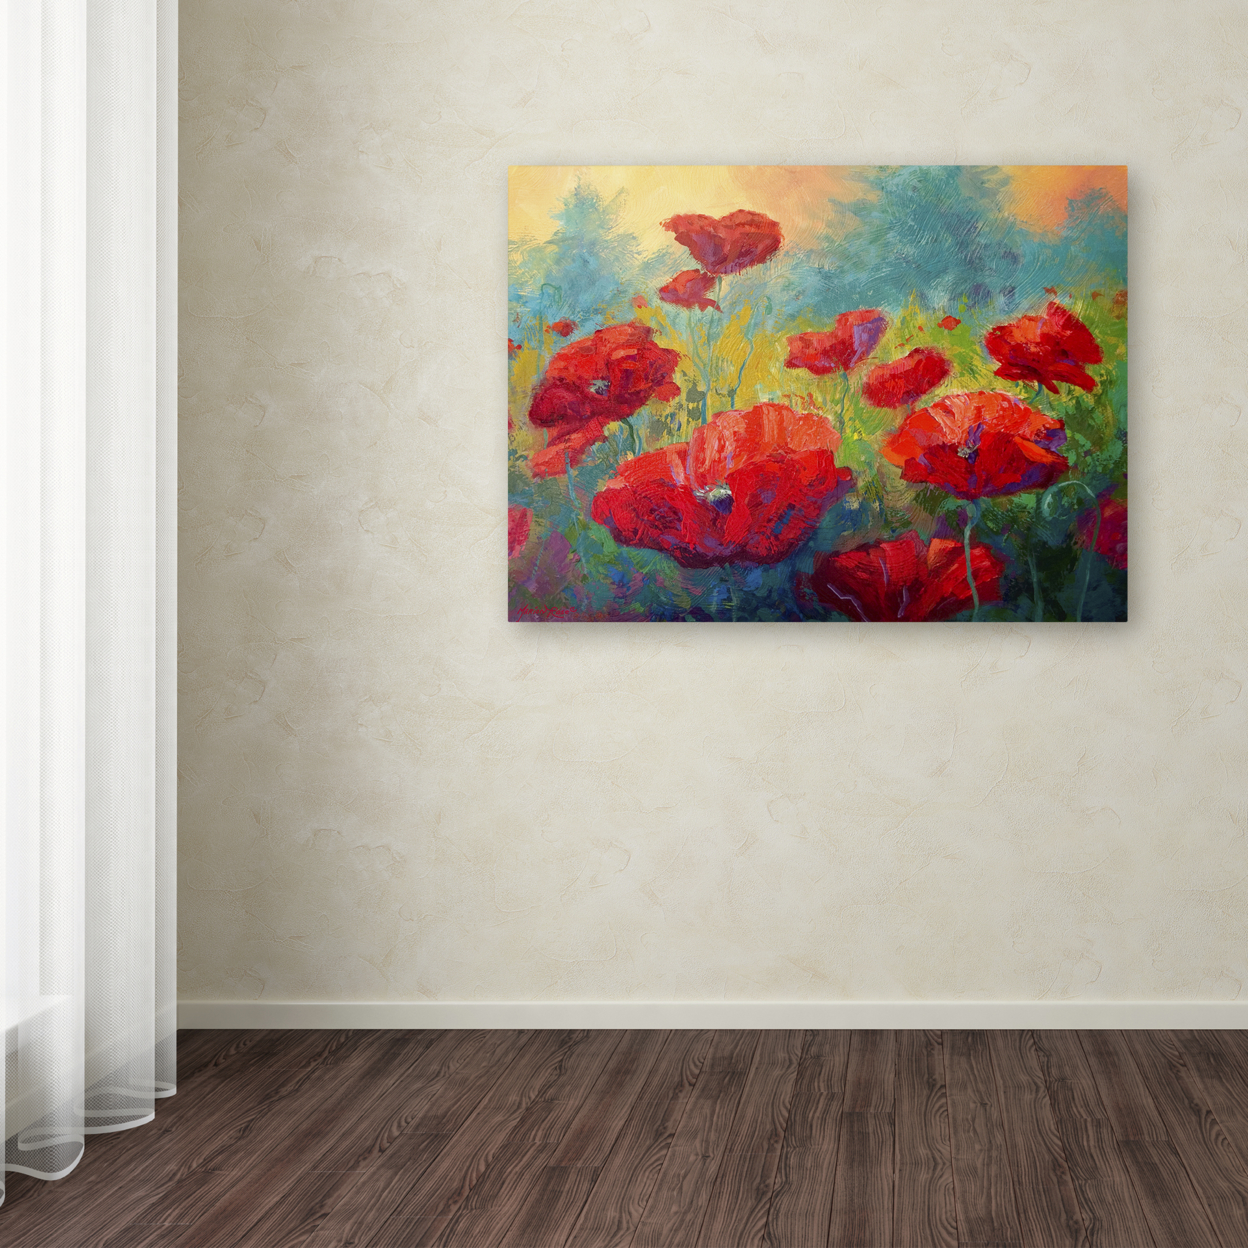 Marion Rose 'Field Of Poppies' Ready To Hang Canvas Art 24 X 32 Inches Made In USA